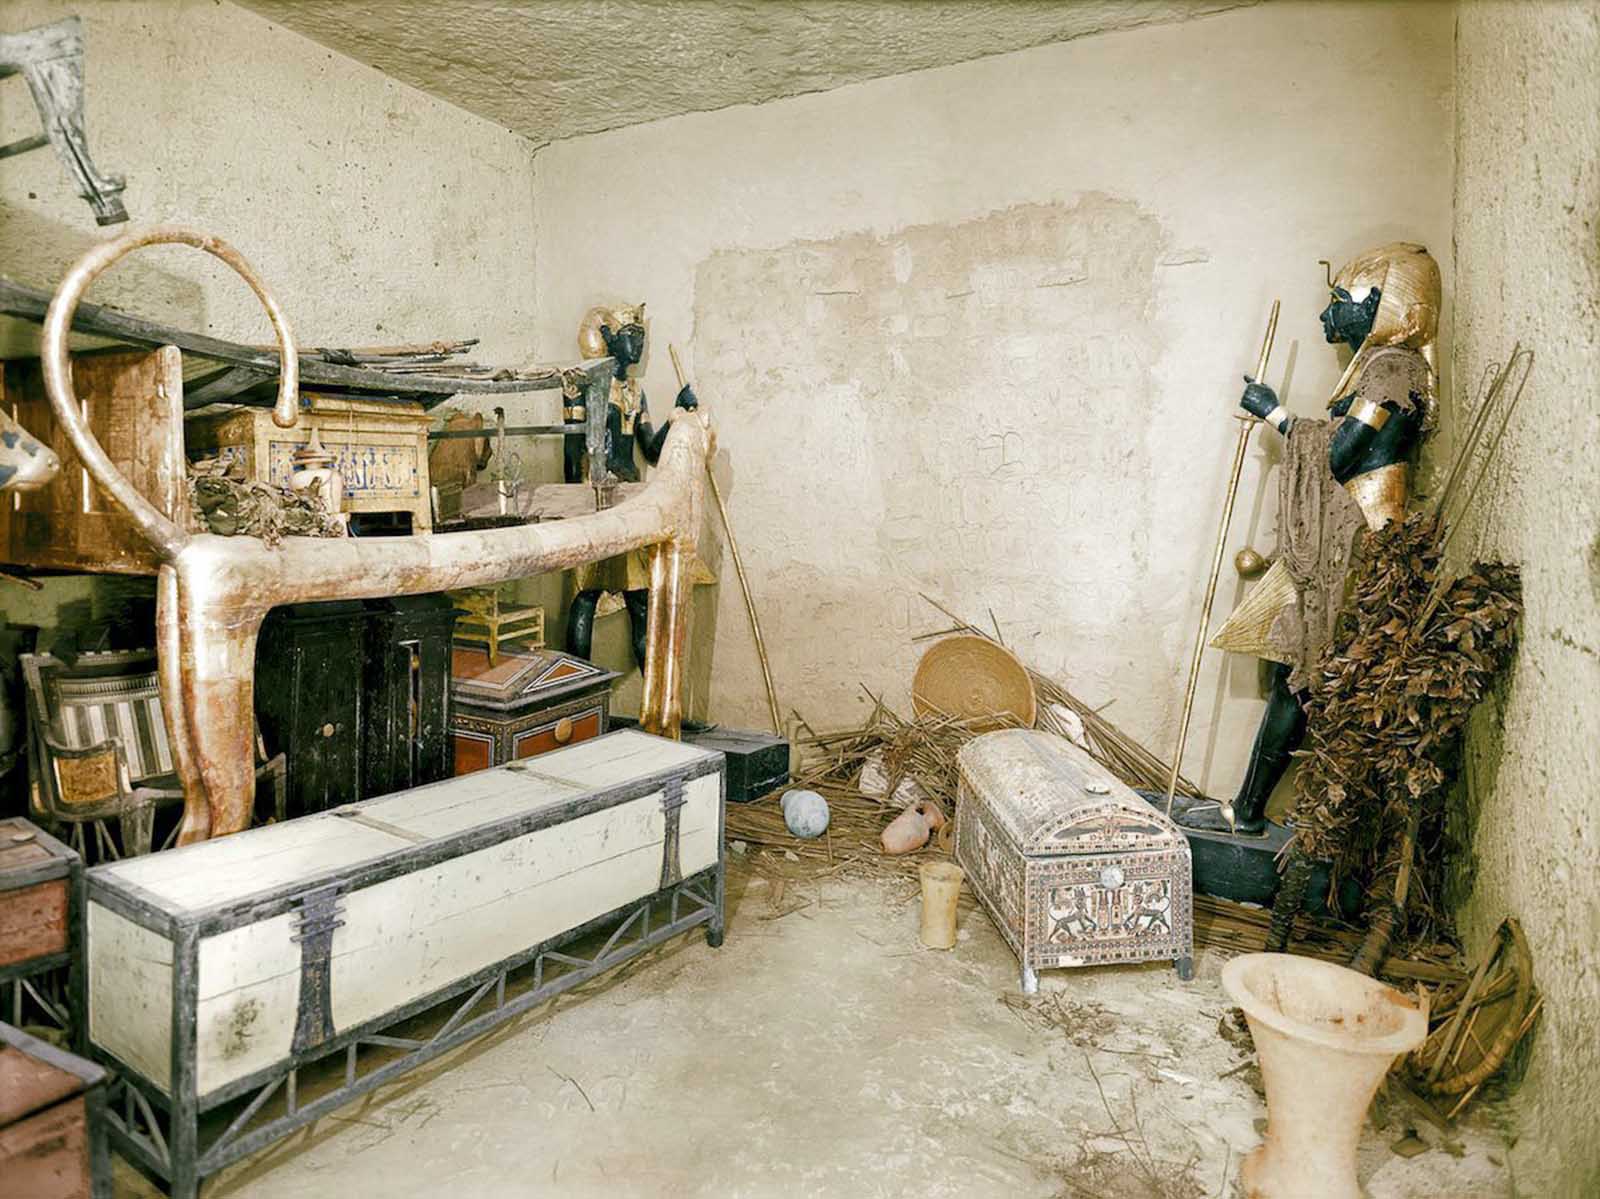 A gilded lion bed, clothes chest and other objects in the antechamber. The wall of the burial chamber is guarded by statues.